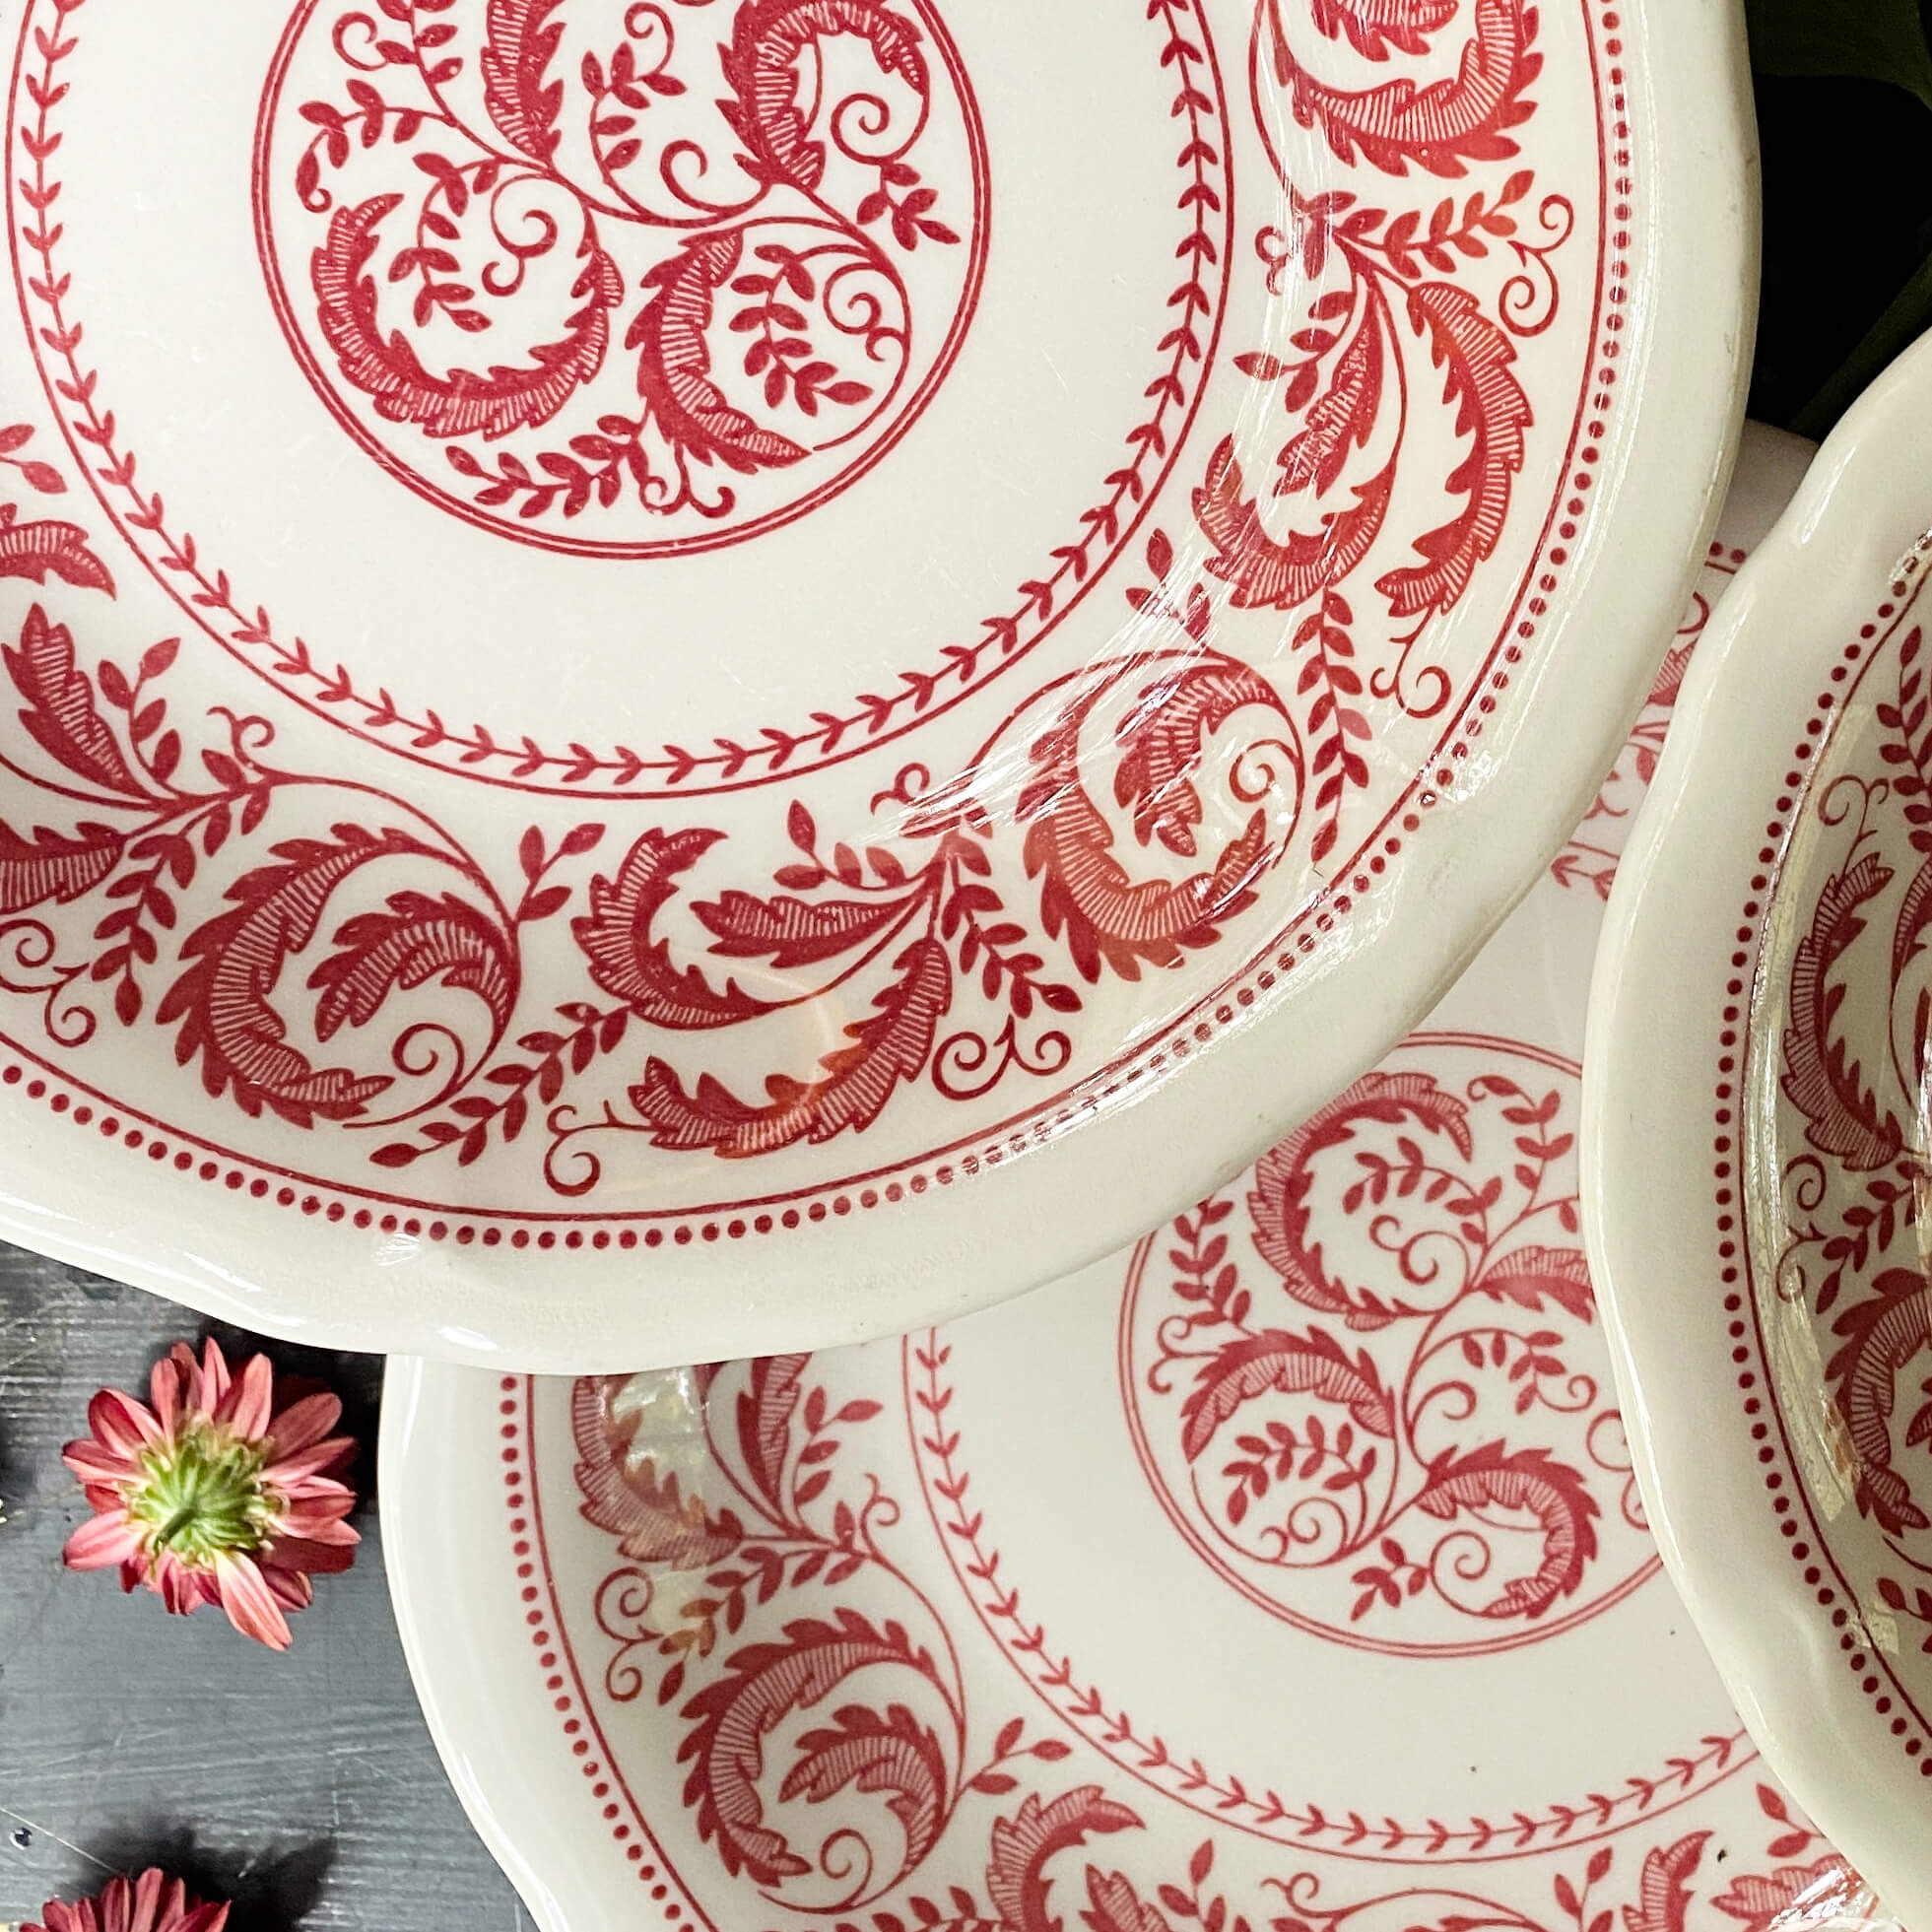 Vintage Shenango Peppercorn Salad Plates - Set of Six Red and White Restaurant Ware circa 1980s